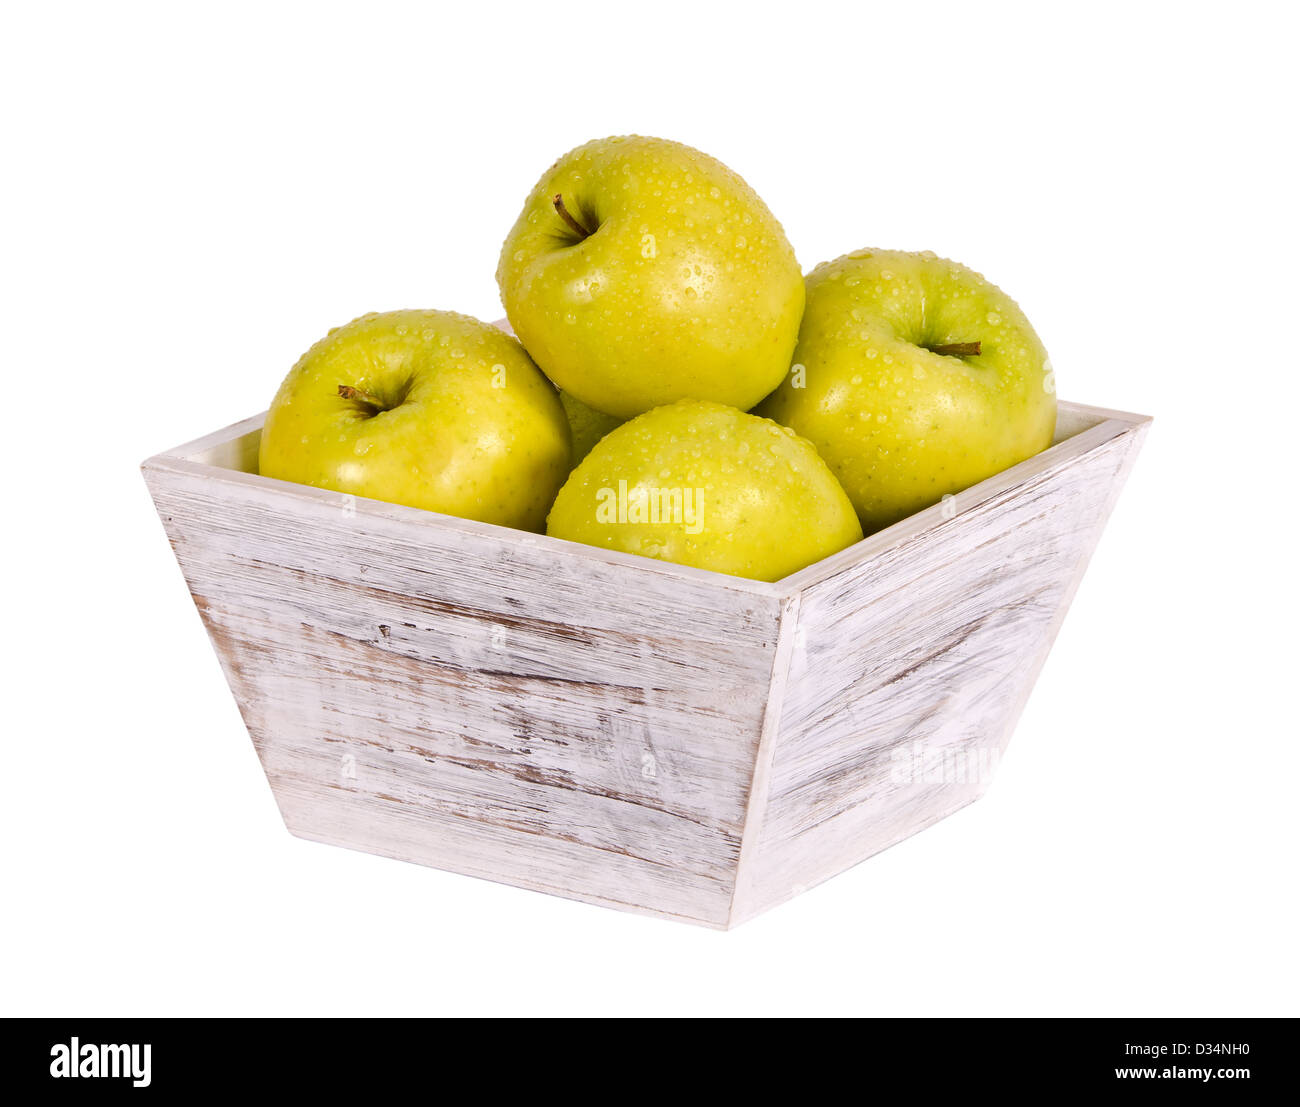 Golden delicious apples in white wooden container isolated over white Stock Photo